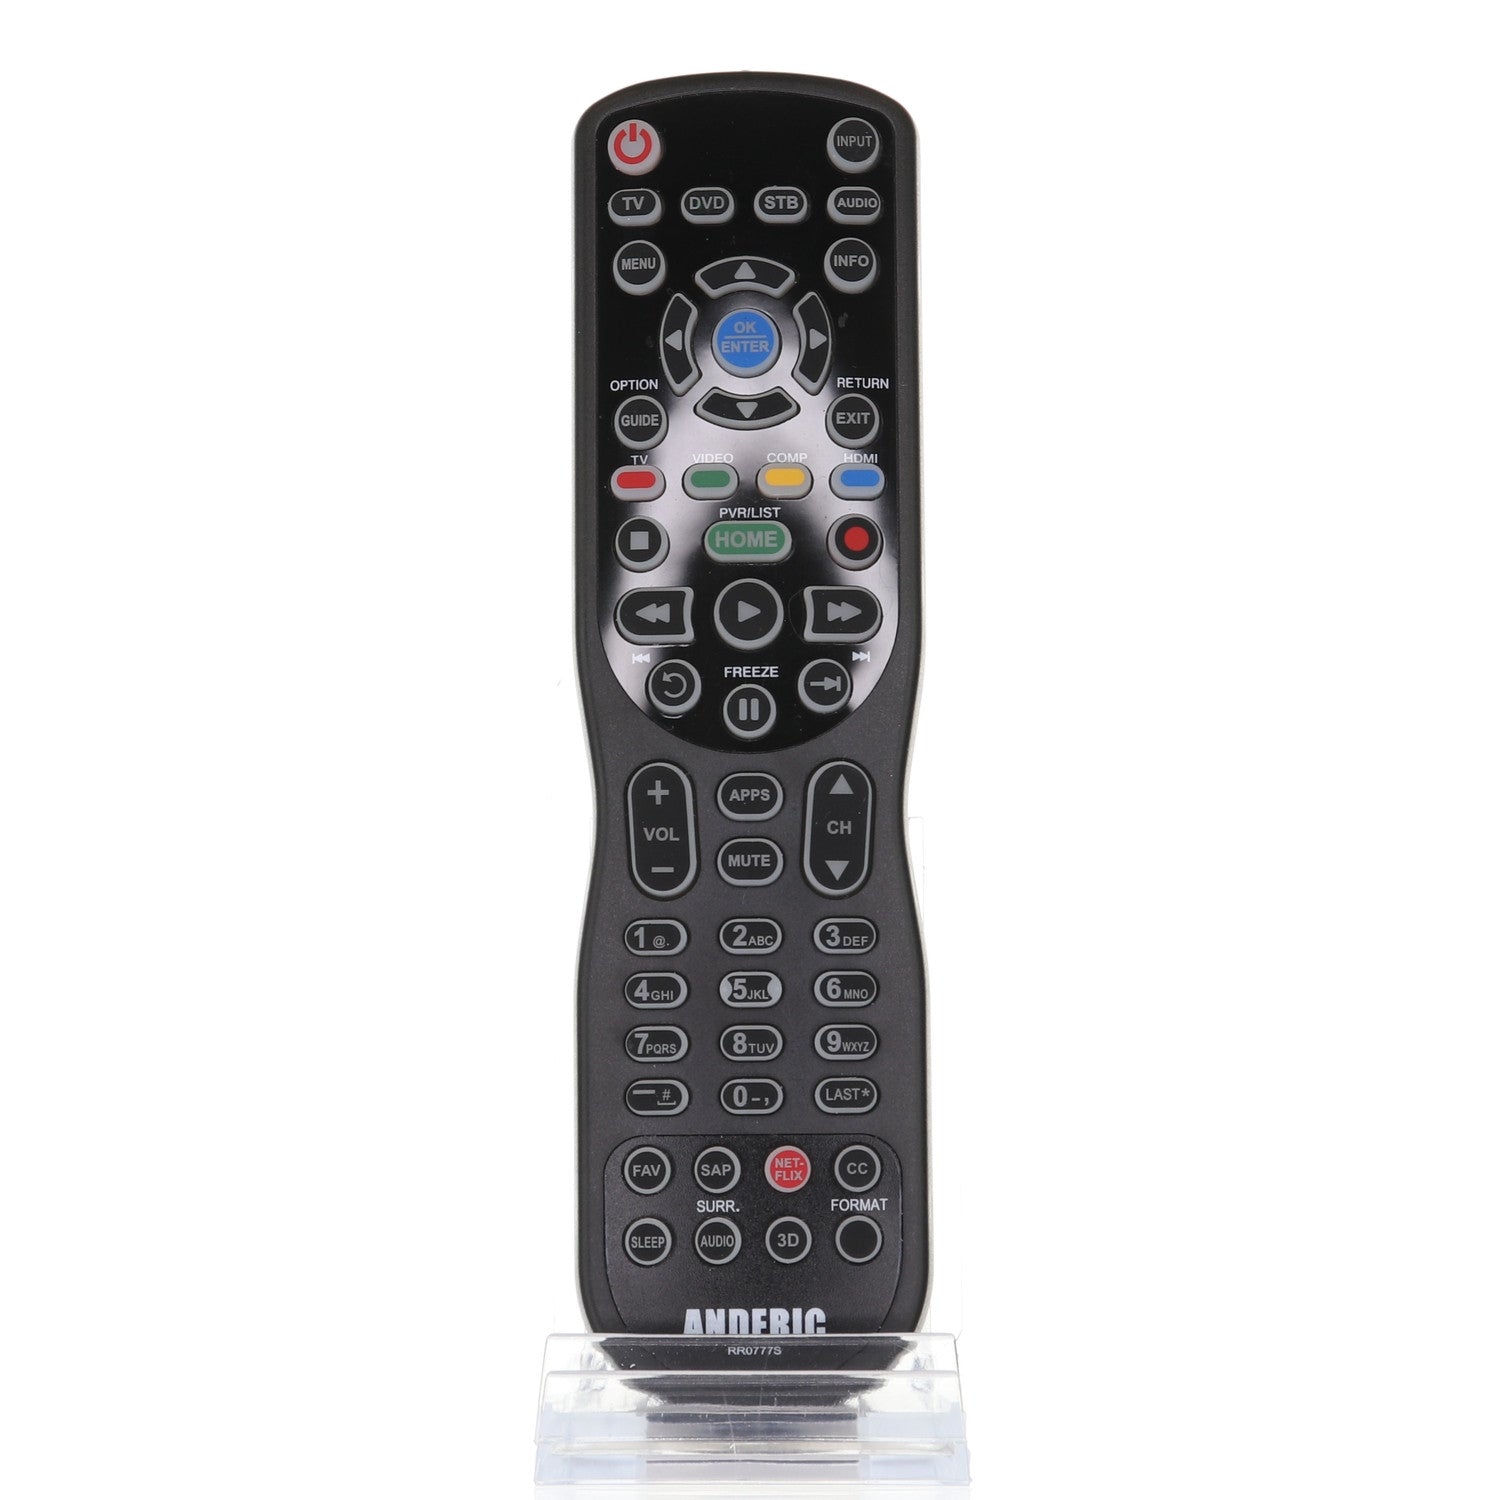 RR0777S 4-Device Universal Remote Control Programmed for Panasonic®